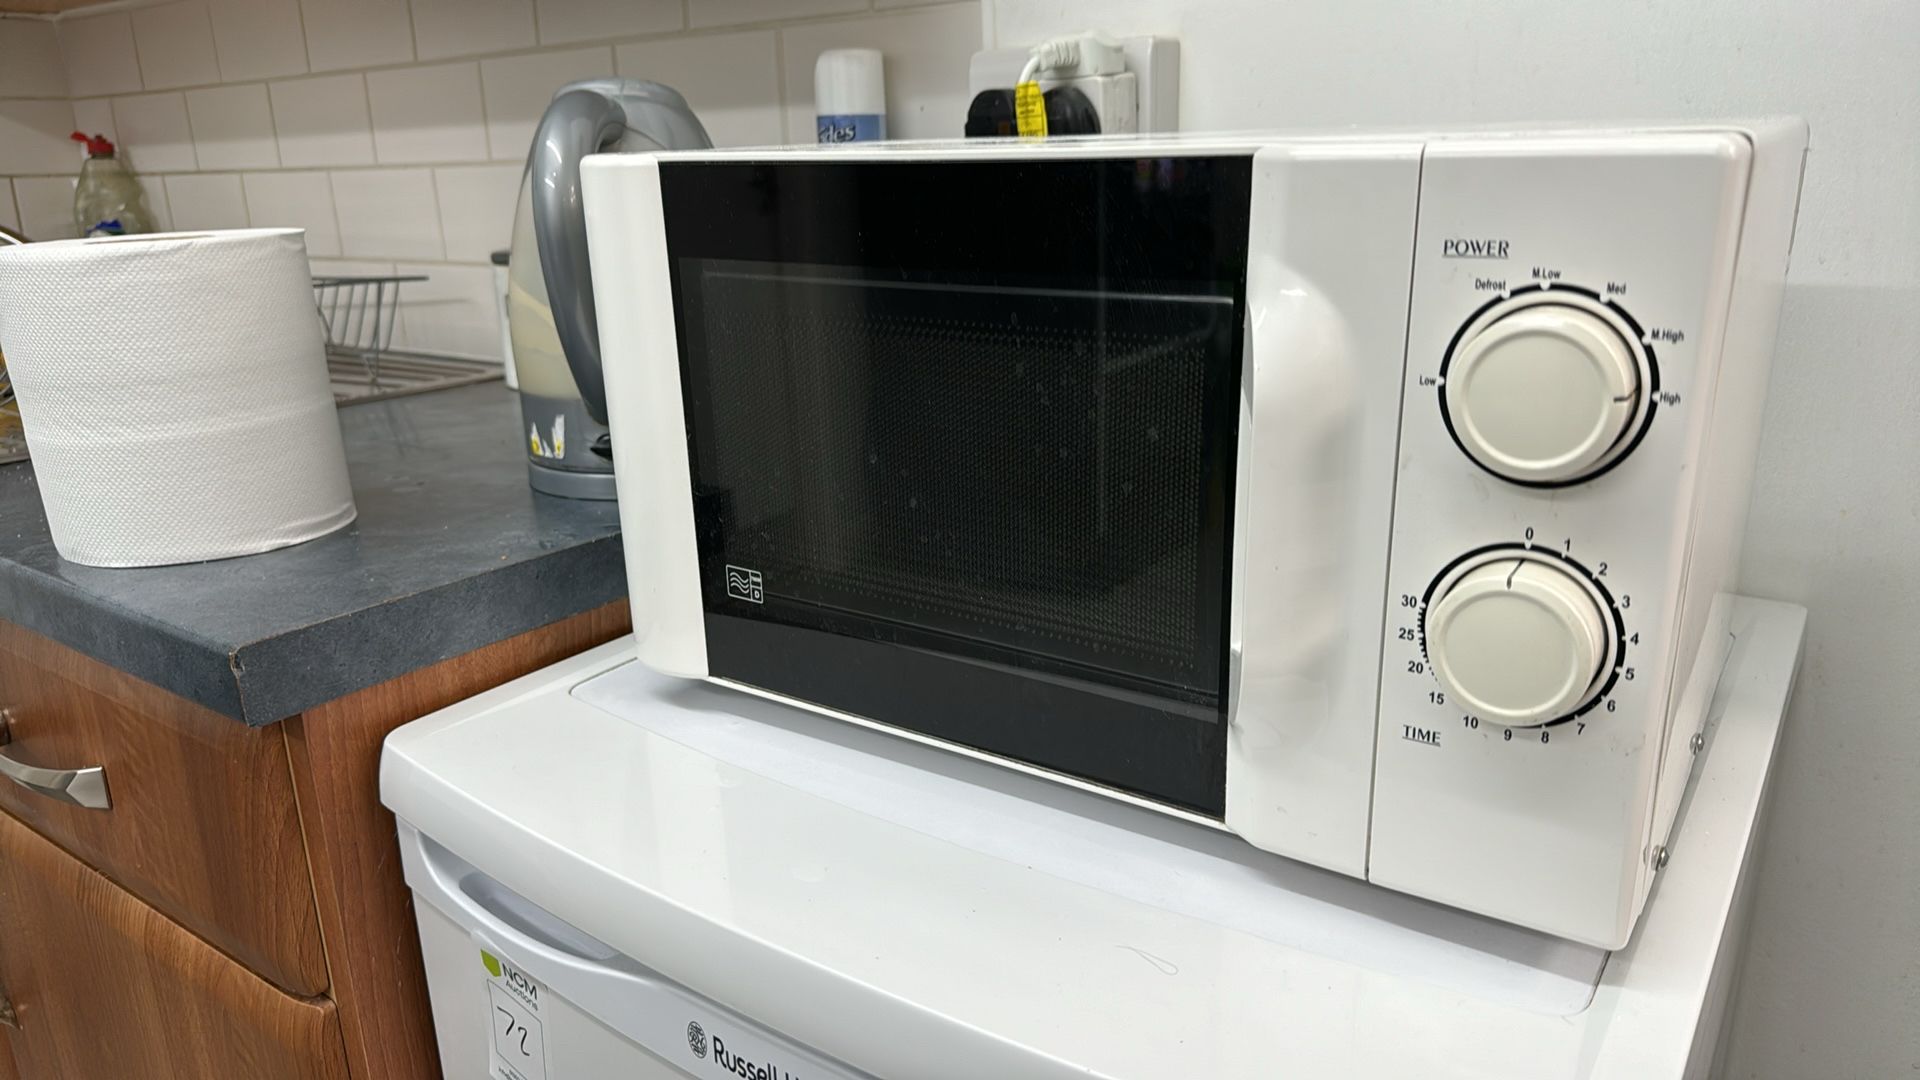 CURRYS ESSENTIALS Microwave - Image 2 of 3